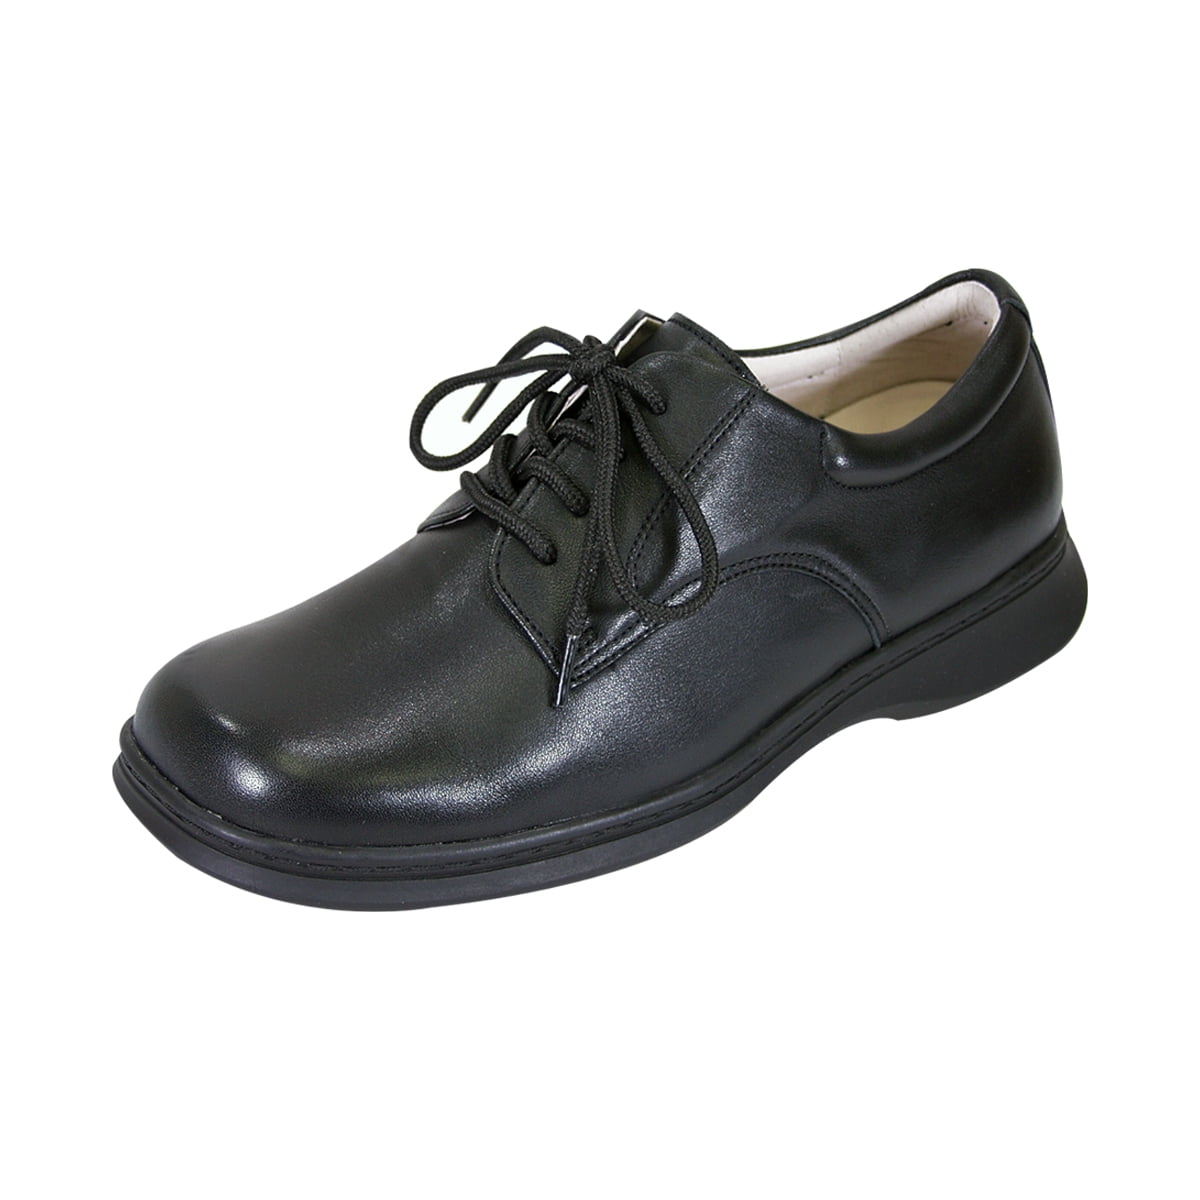 24 HOUR COMFORT Tim Wide Width Comfort Shoes For Work and Casual Attire ...